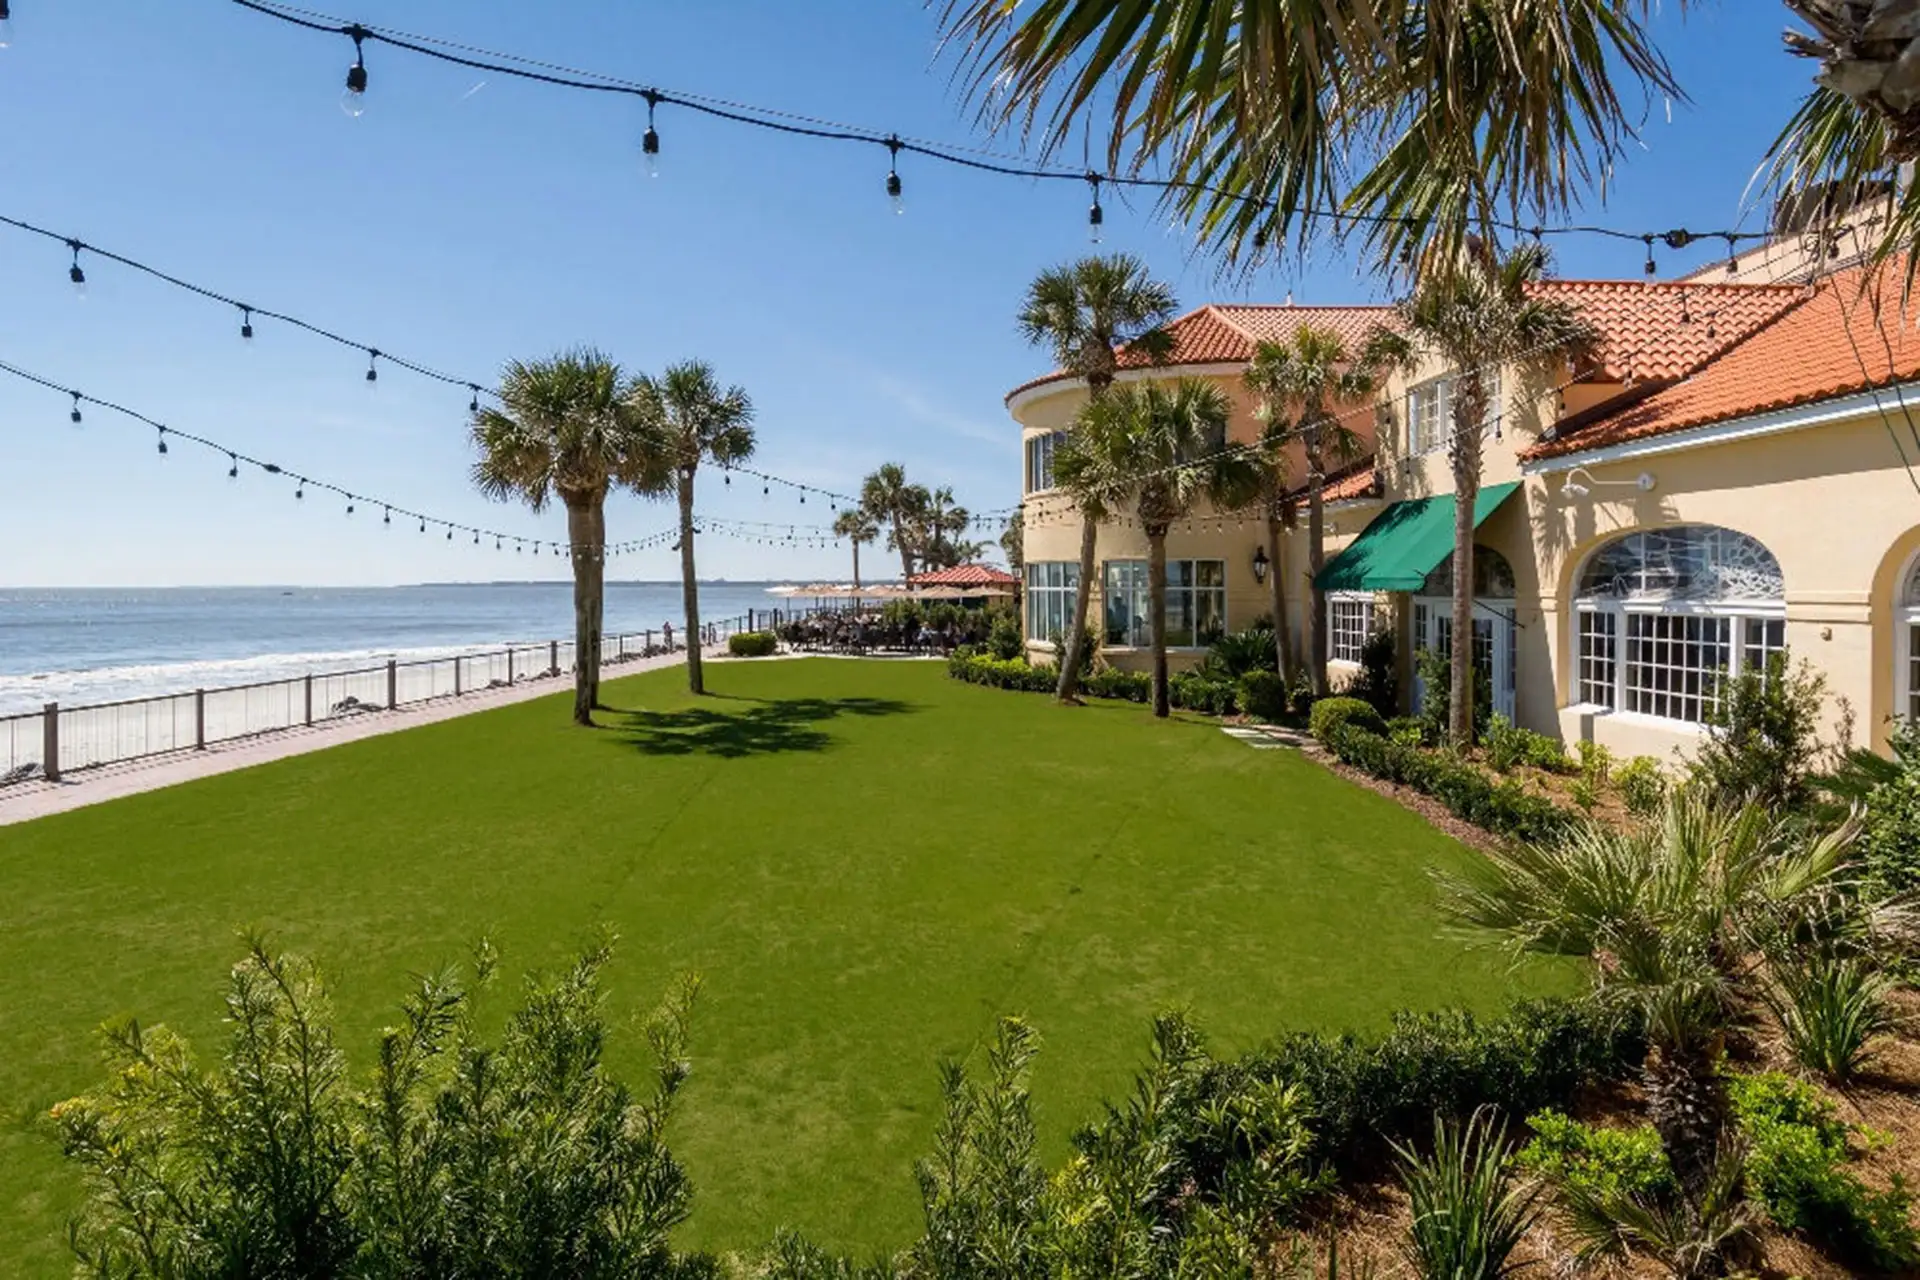 The King and Prince Beach & Golf Resort on St. Simons Island in Georgia; Courtesy of The King and Prince Beach & Golf Resort